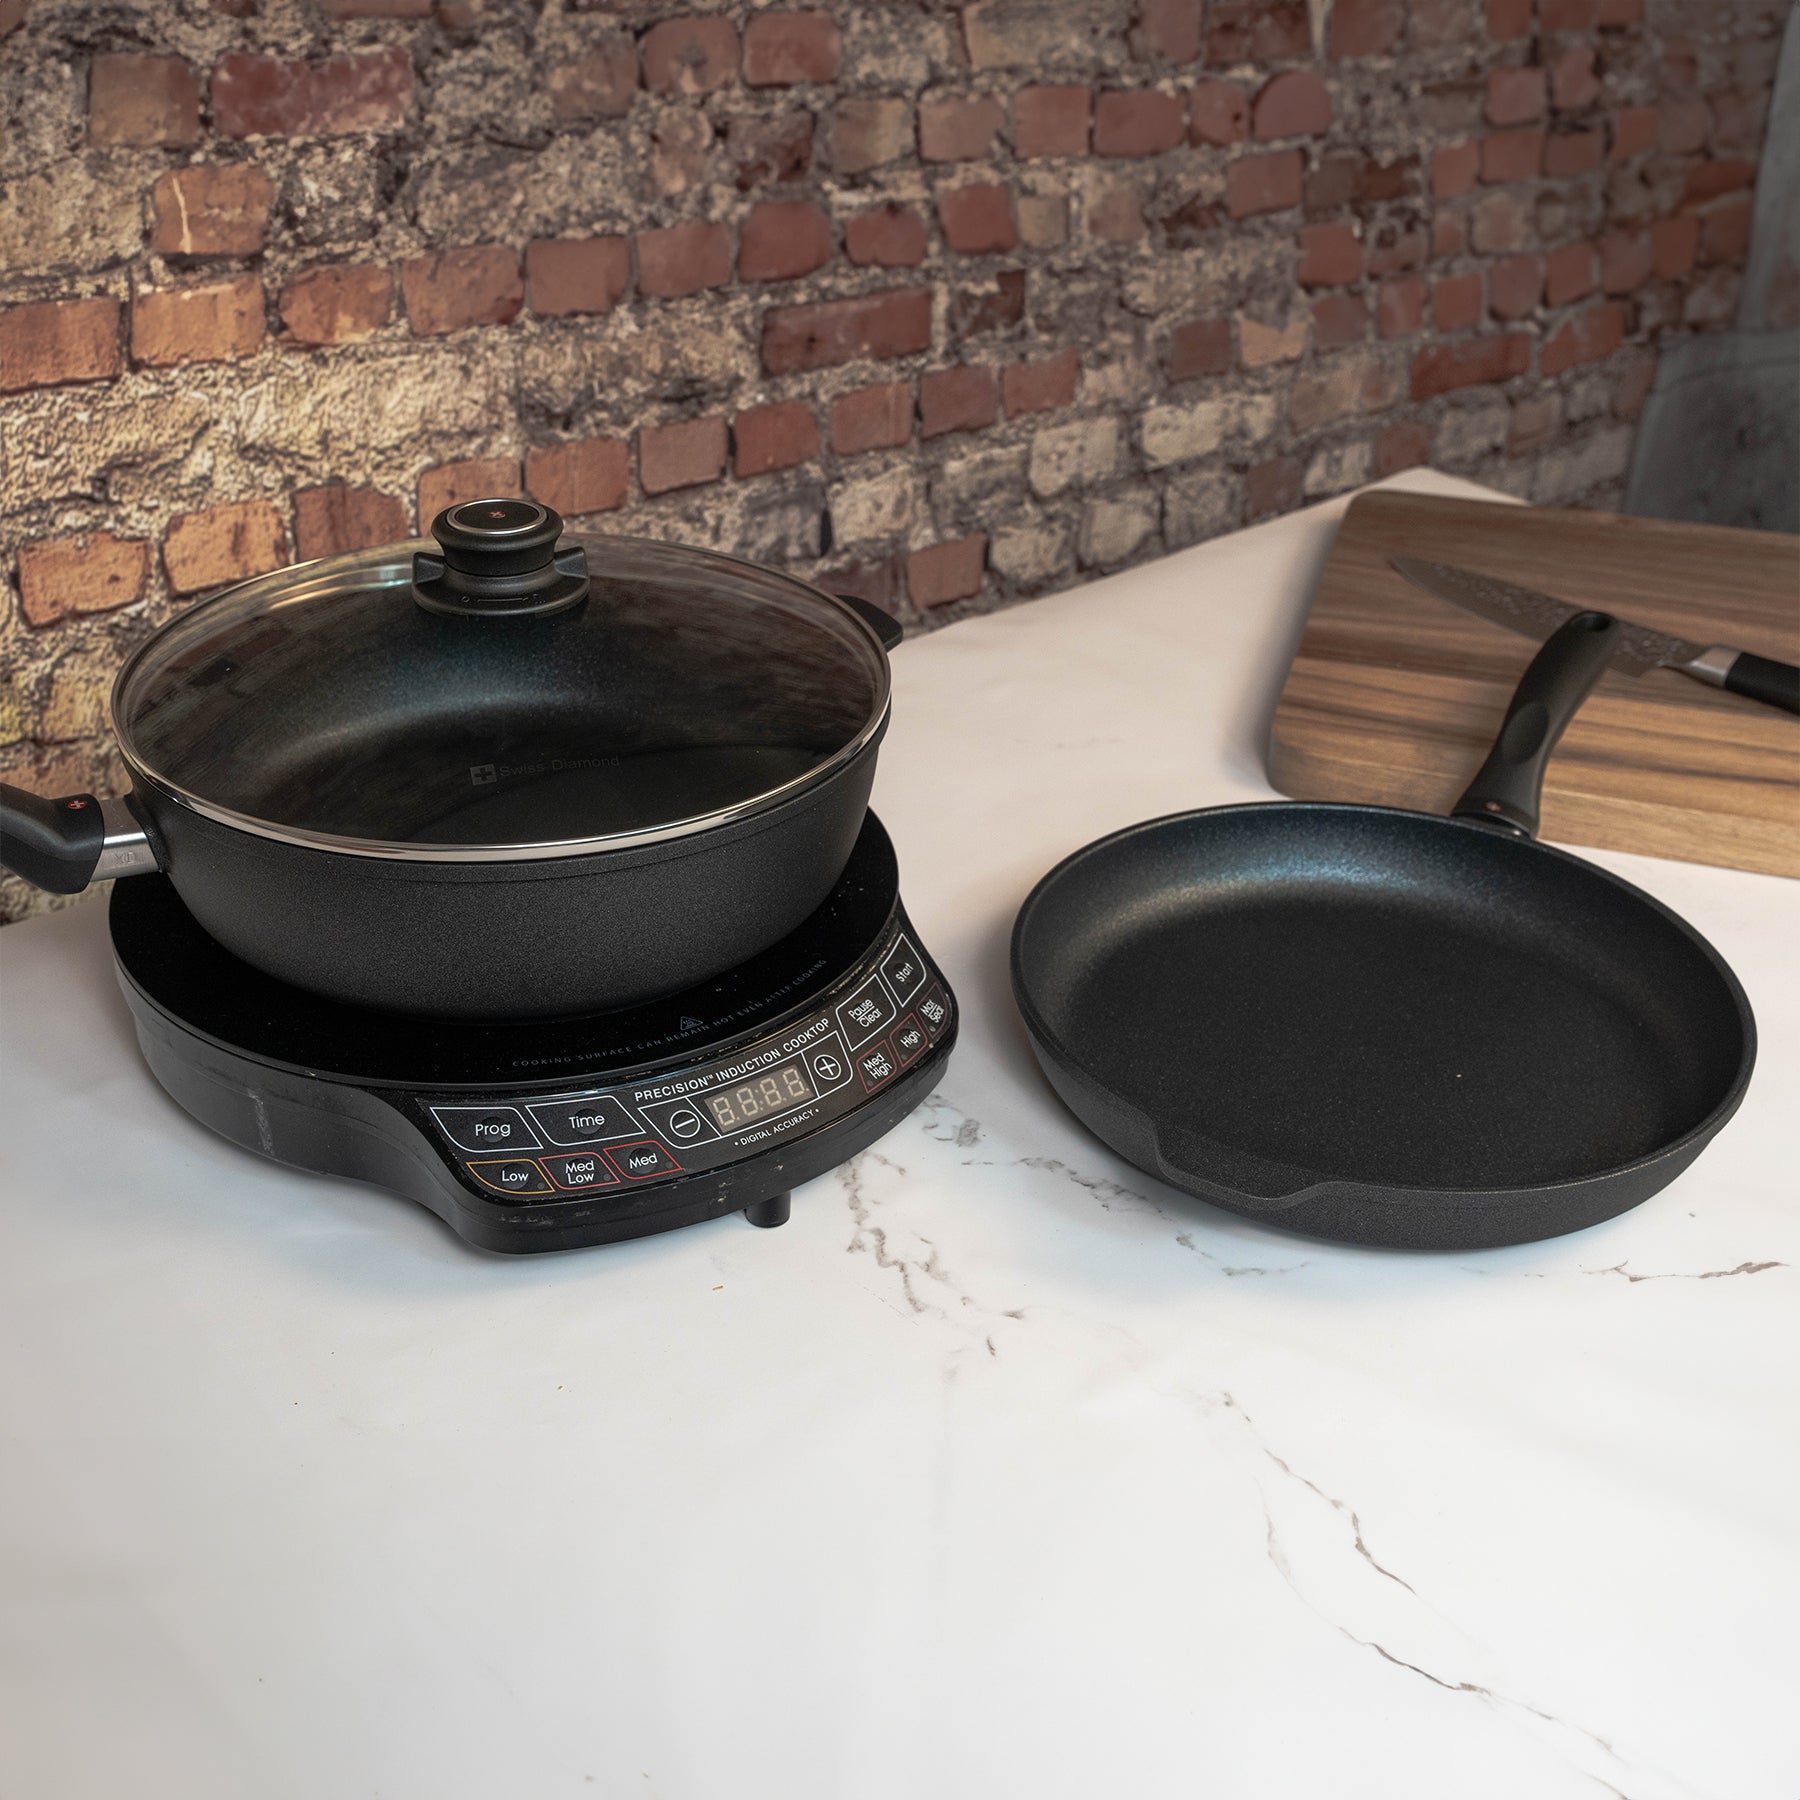 XD Nonstick 3-Piece Set - Fry Pan & Saute Pan - Induction on hot plate with lid